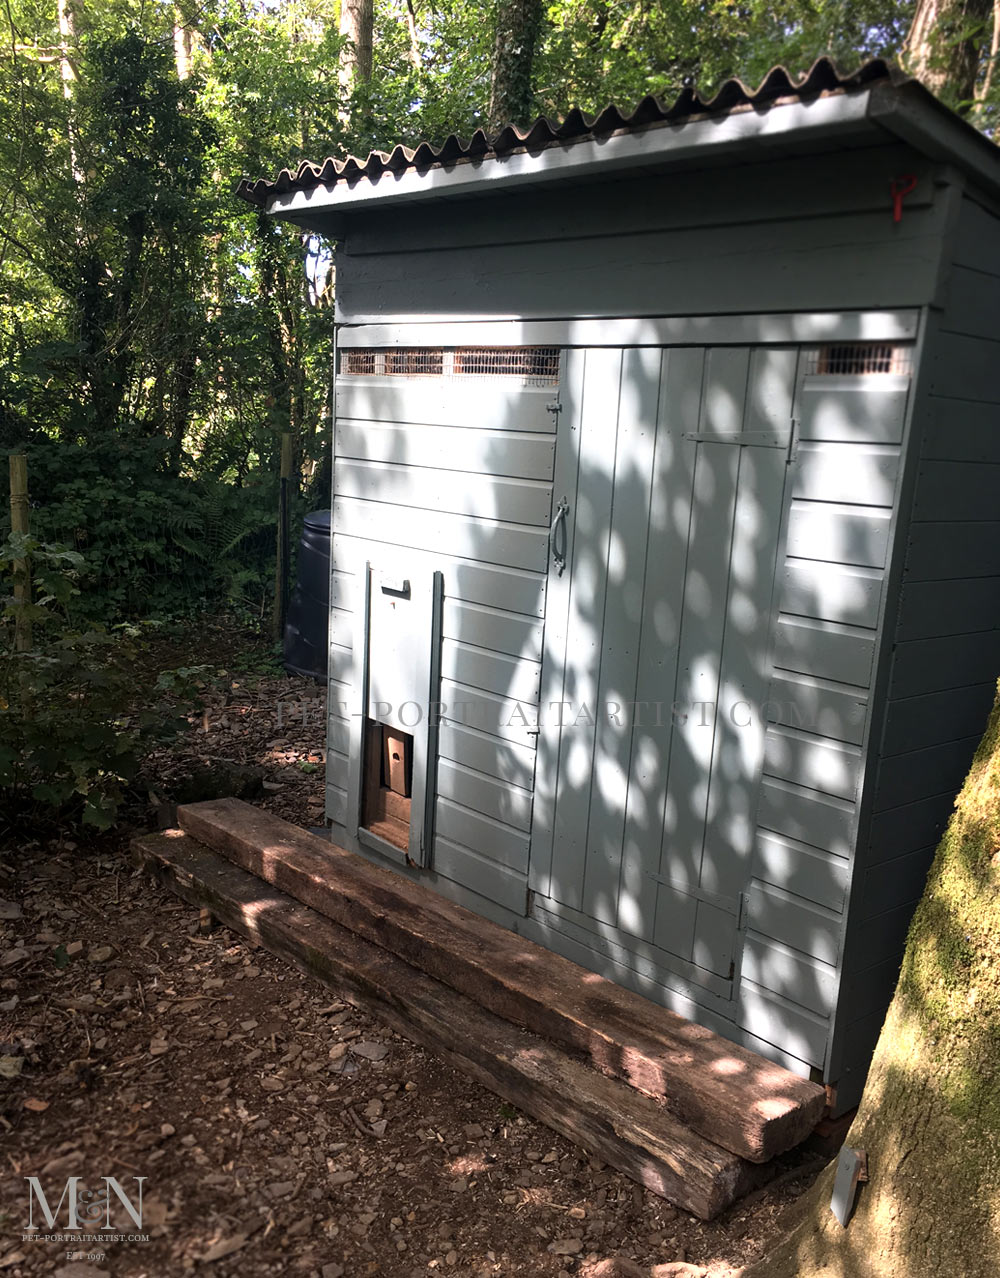 Extending the chicken shed